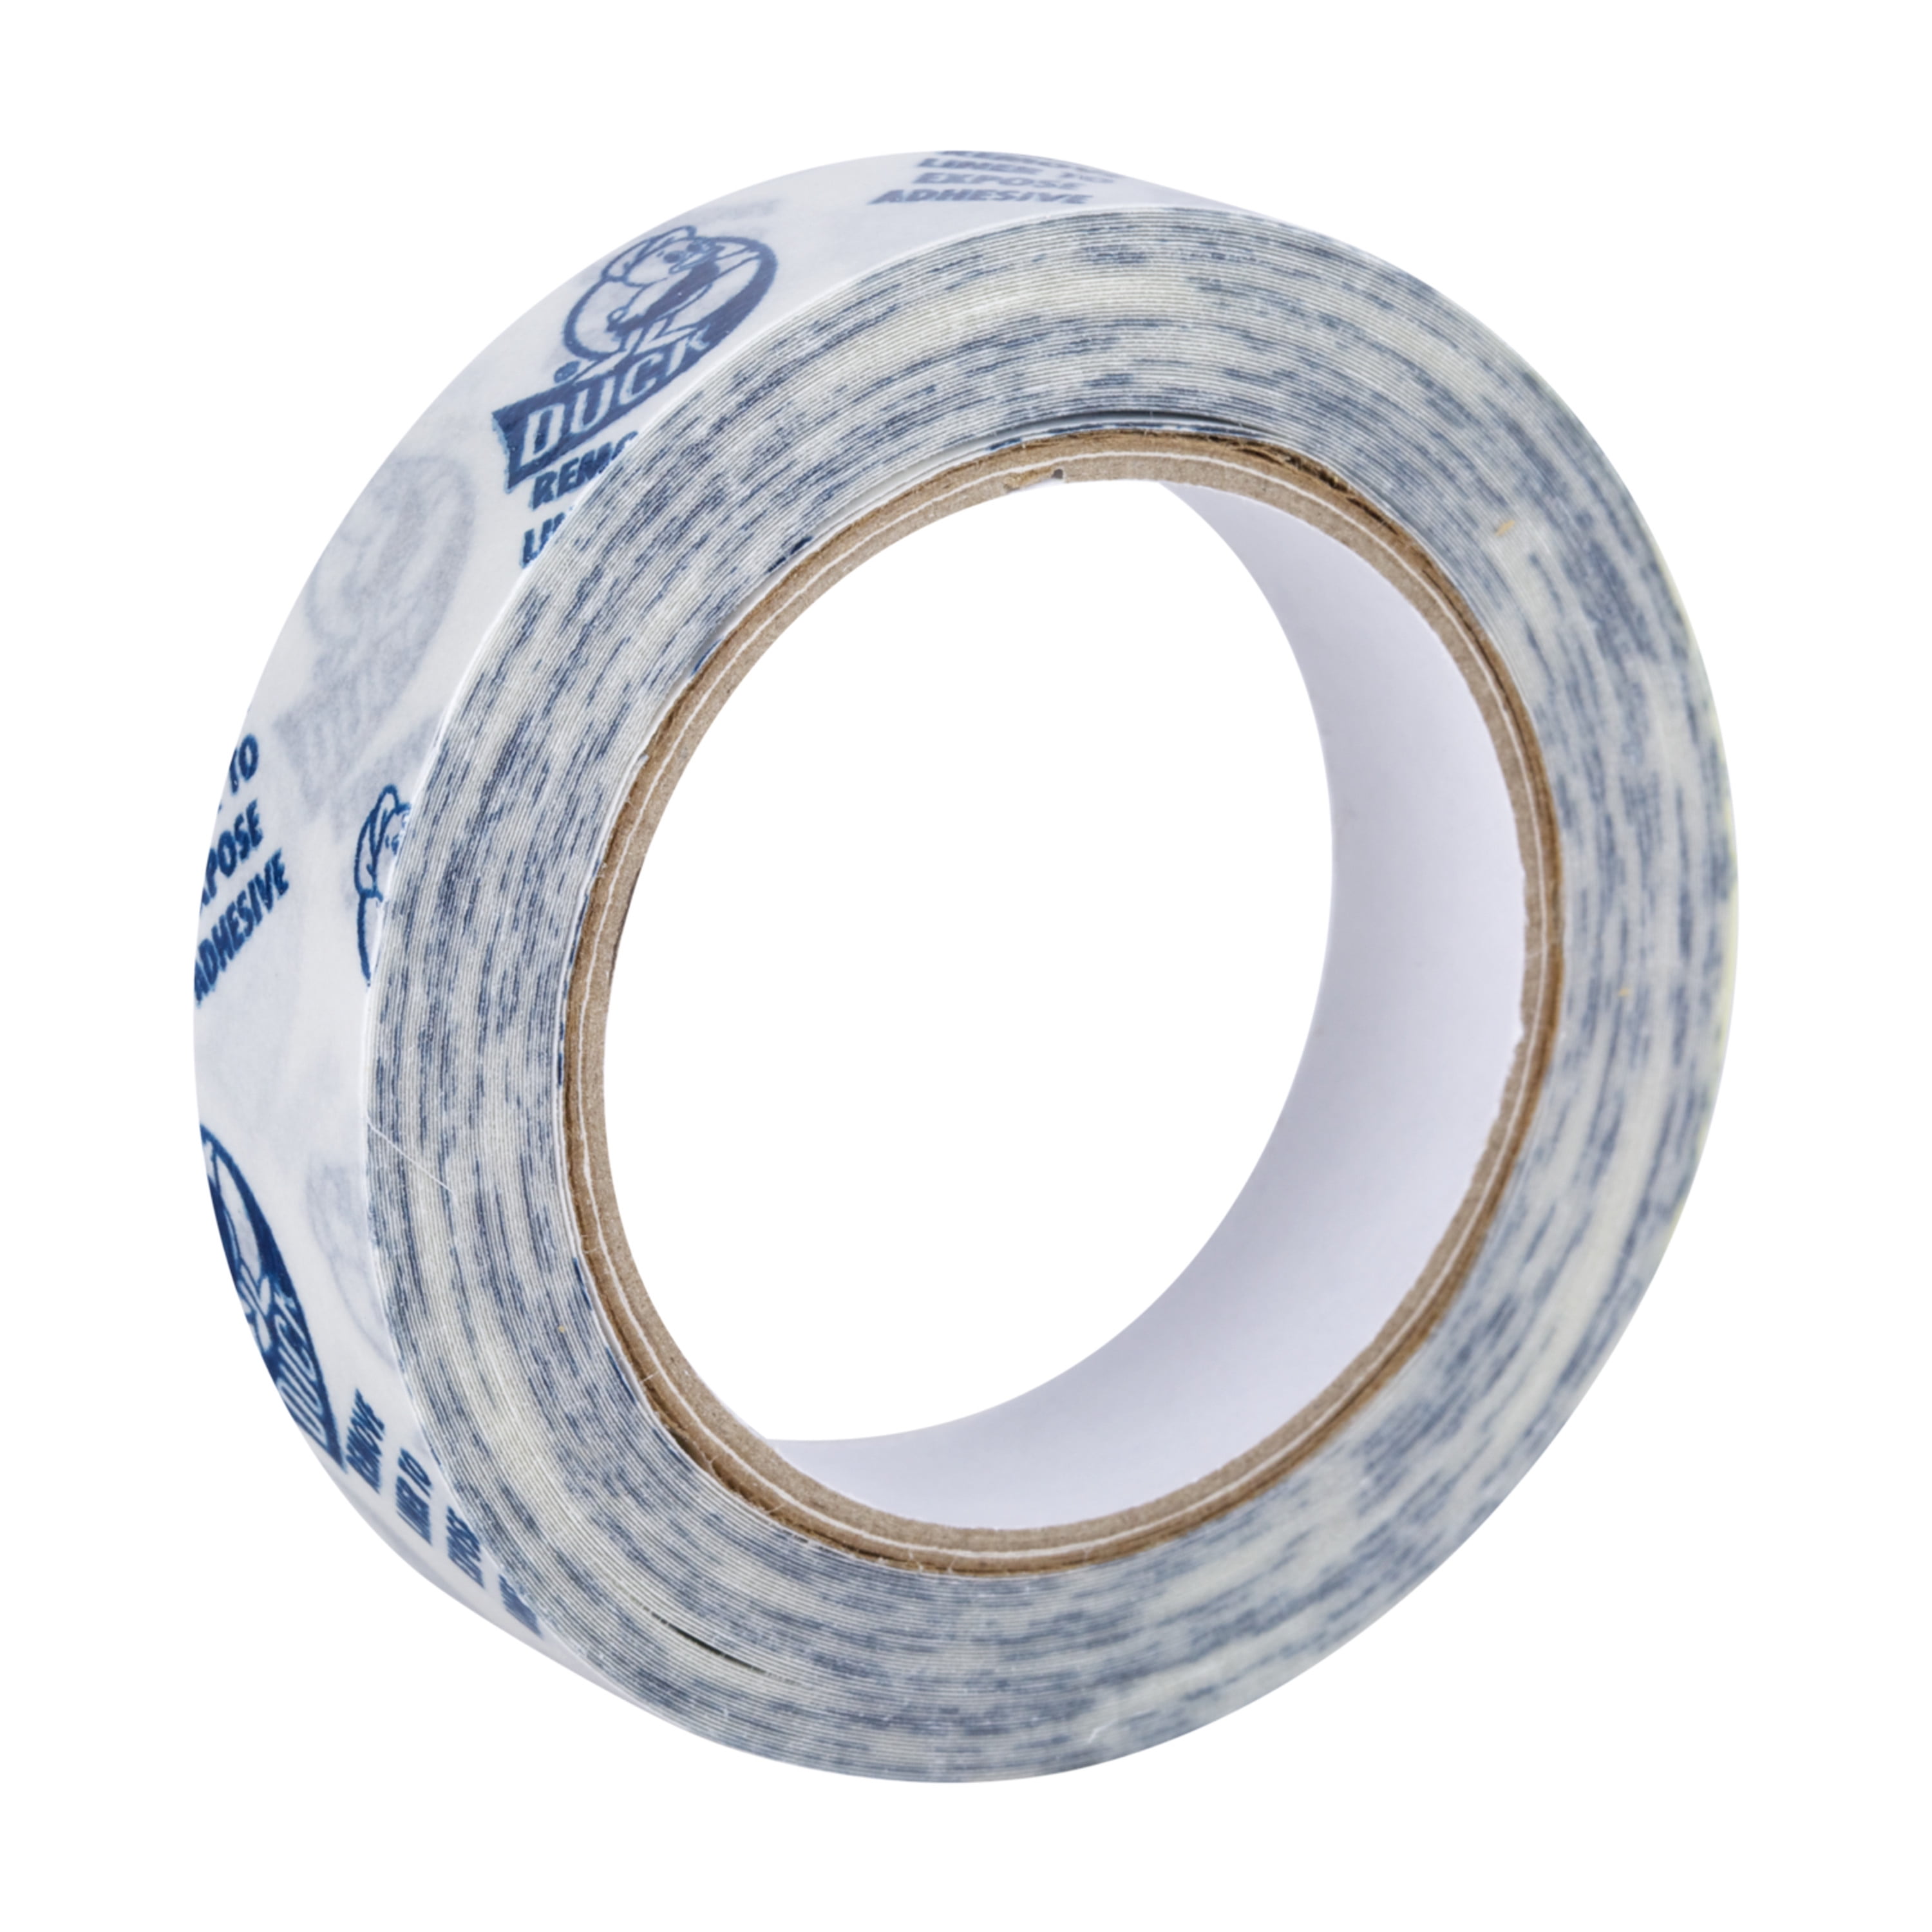 Duck Brand Clear Double-Sided Indoor Window Kit Tape, .25 in. x 24 ft. 